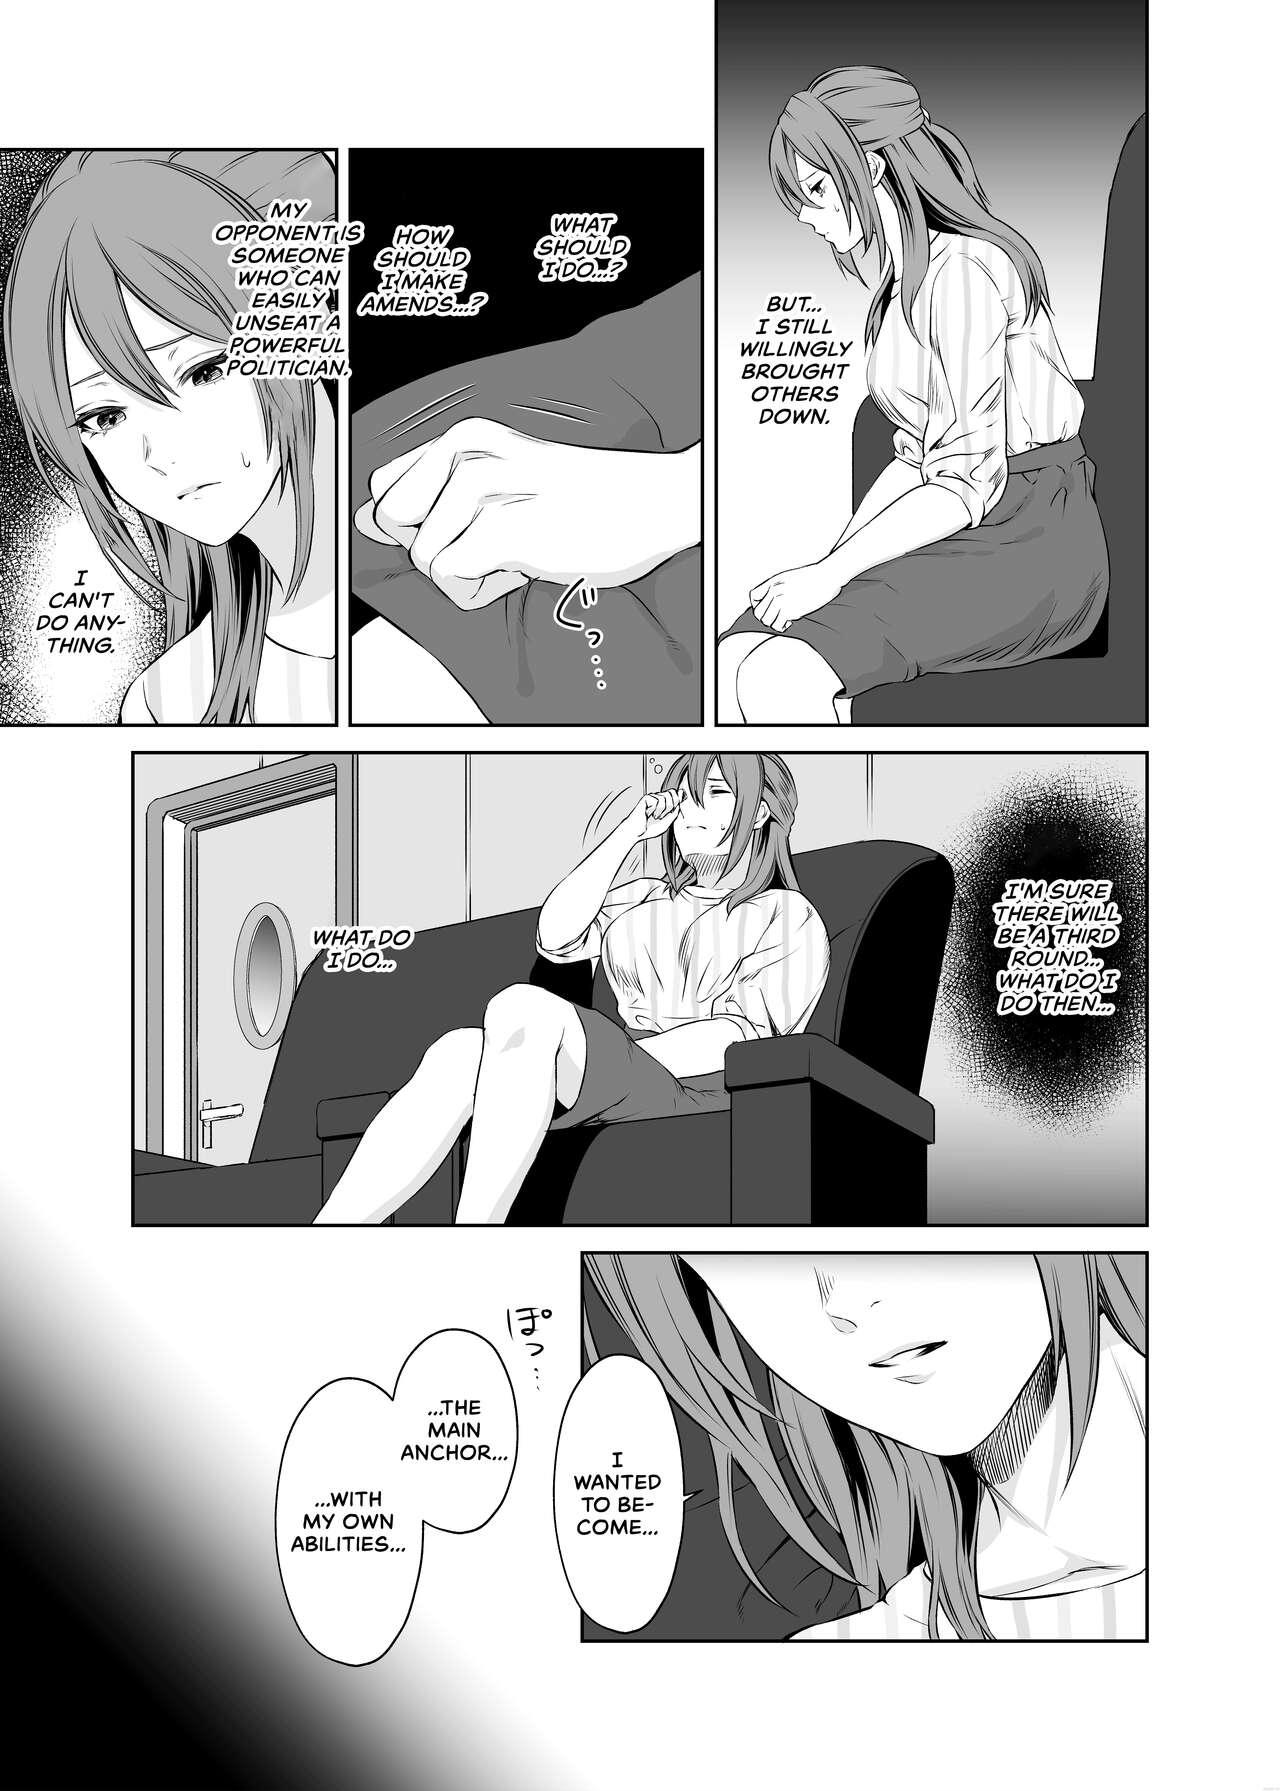 Monster Dick [Remora Works (Meriko)] LesFes Co -Candid Reporting- Vol. 003 [English] - Original Africa - Page 6